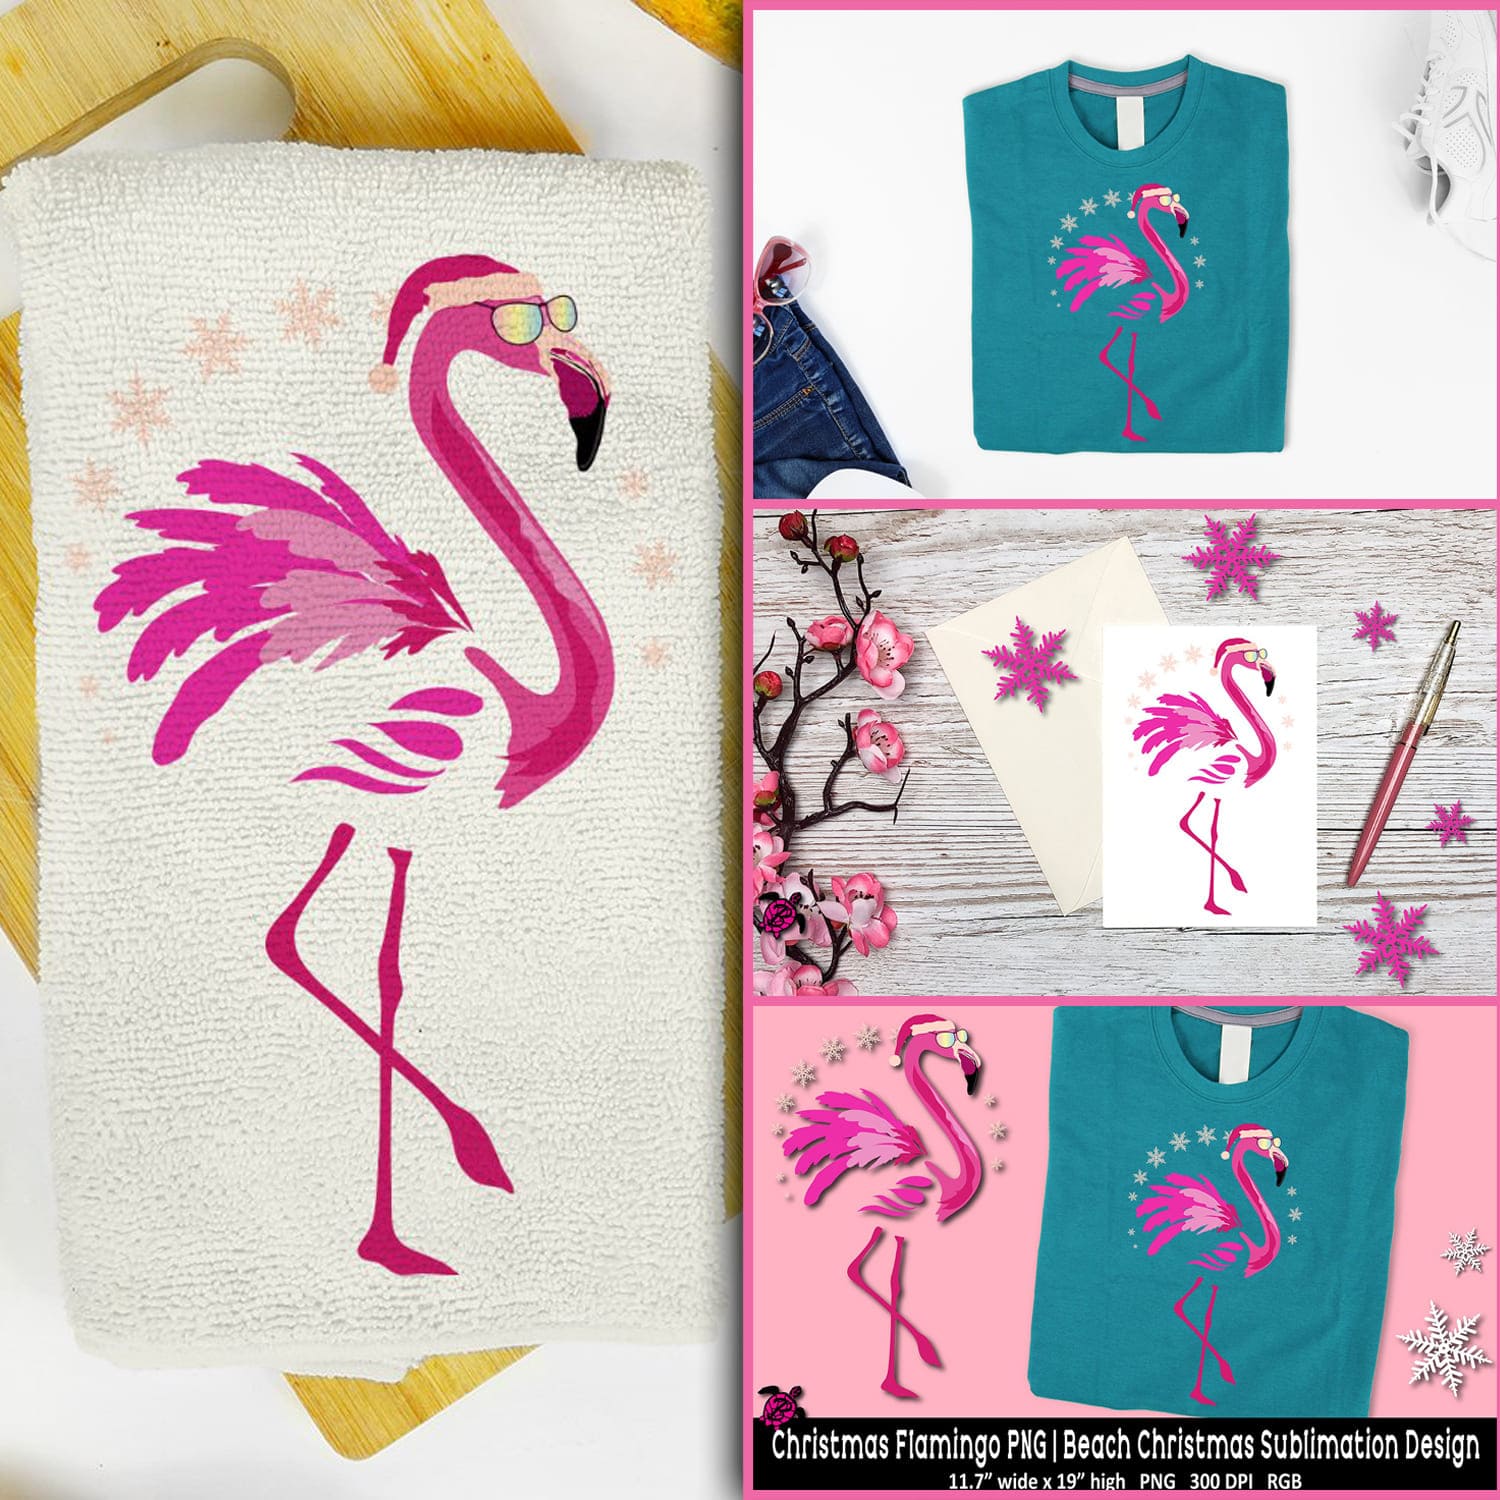 Christmas flamingo PNG beach christmas sublimation, the second picture 1500x1500.